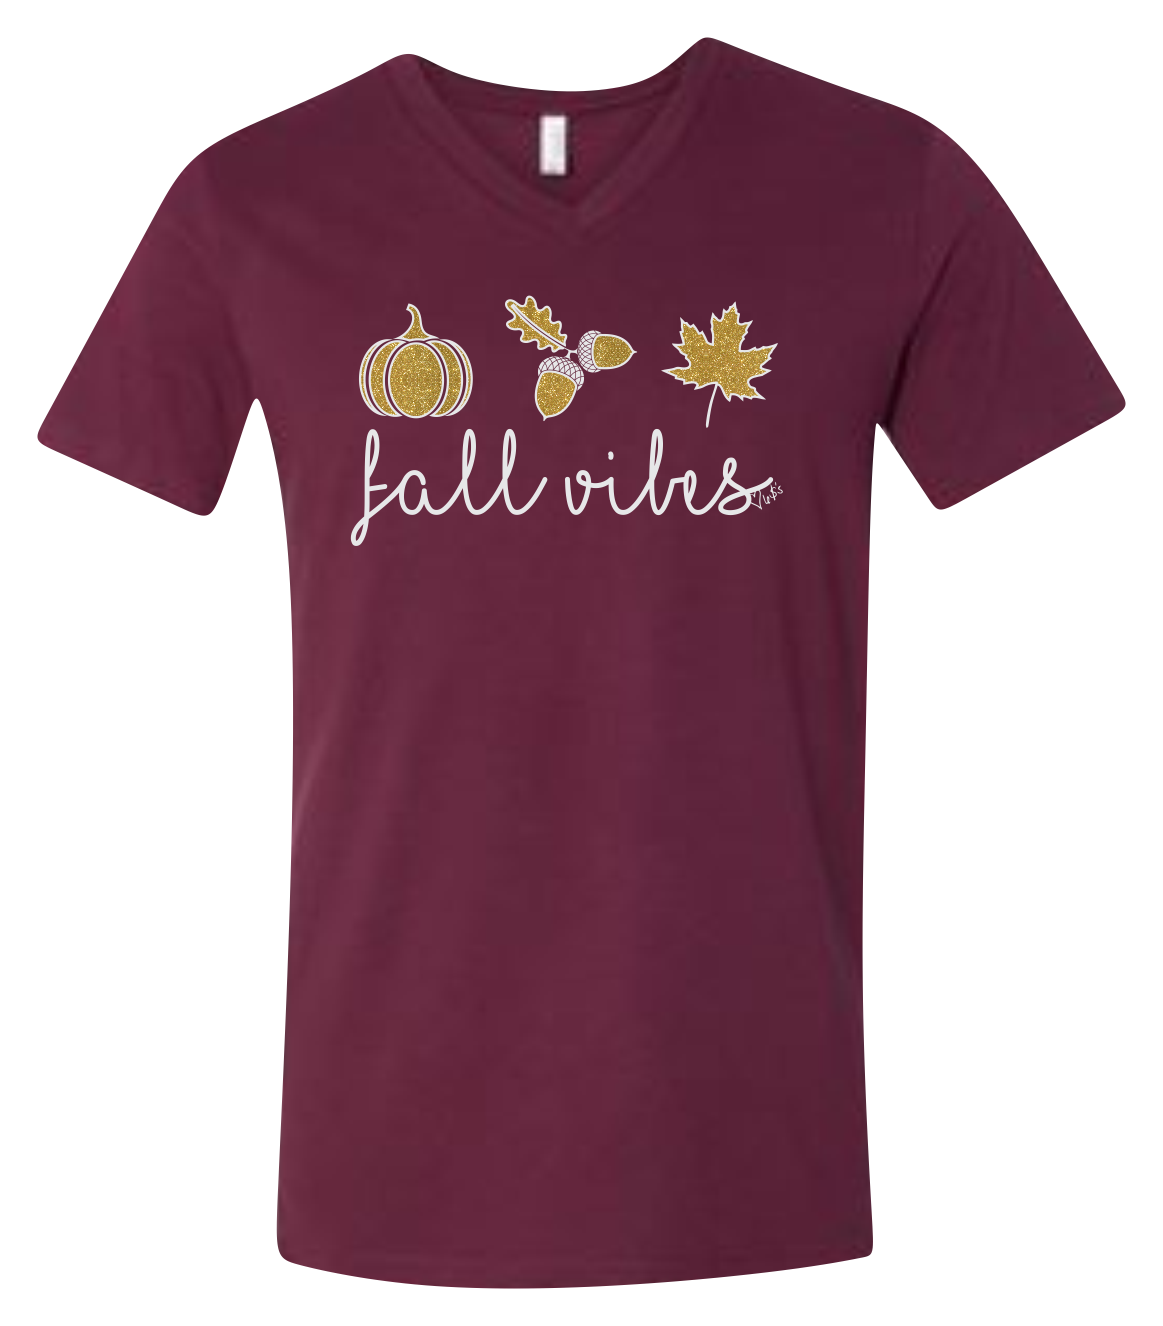 Fall Vibes Short Sleeve Graphic T-shirt